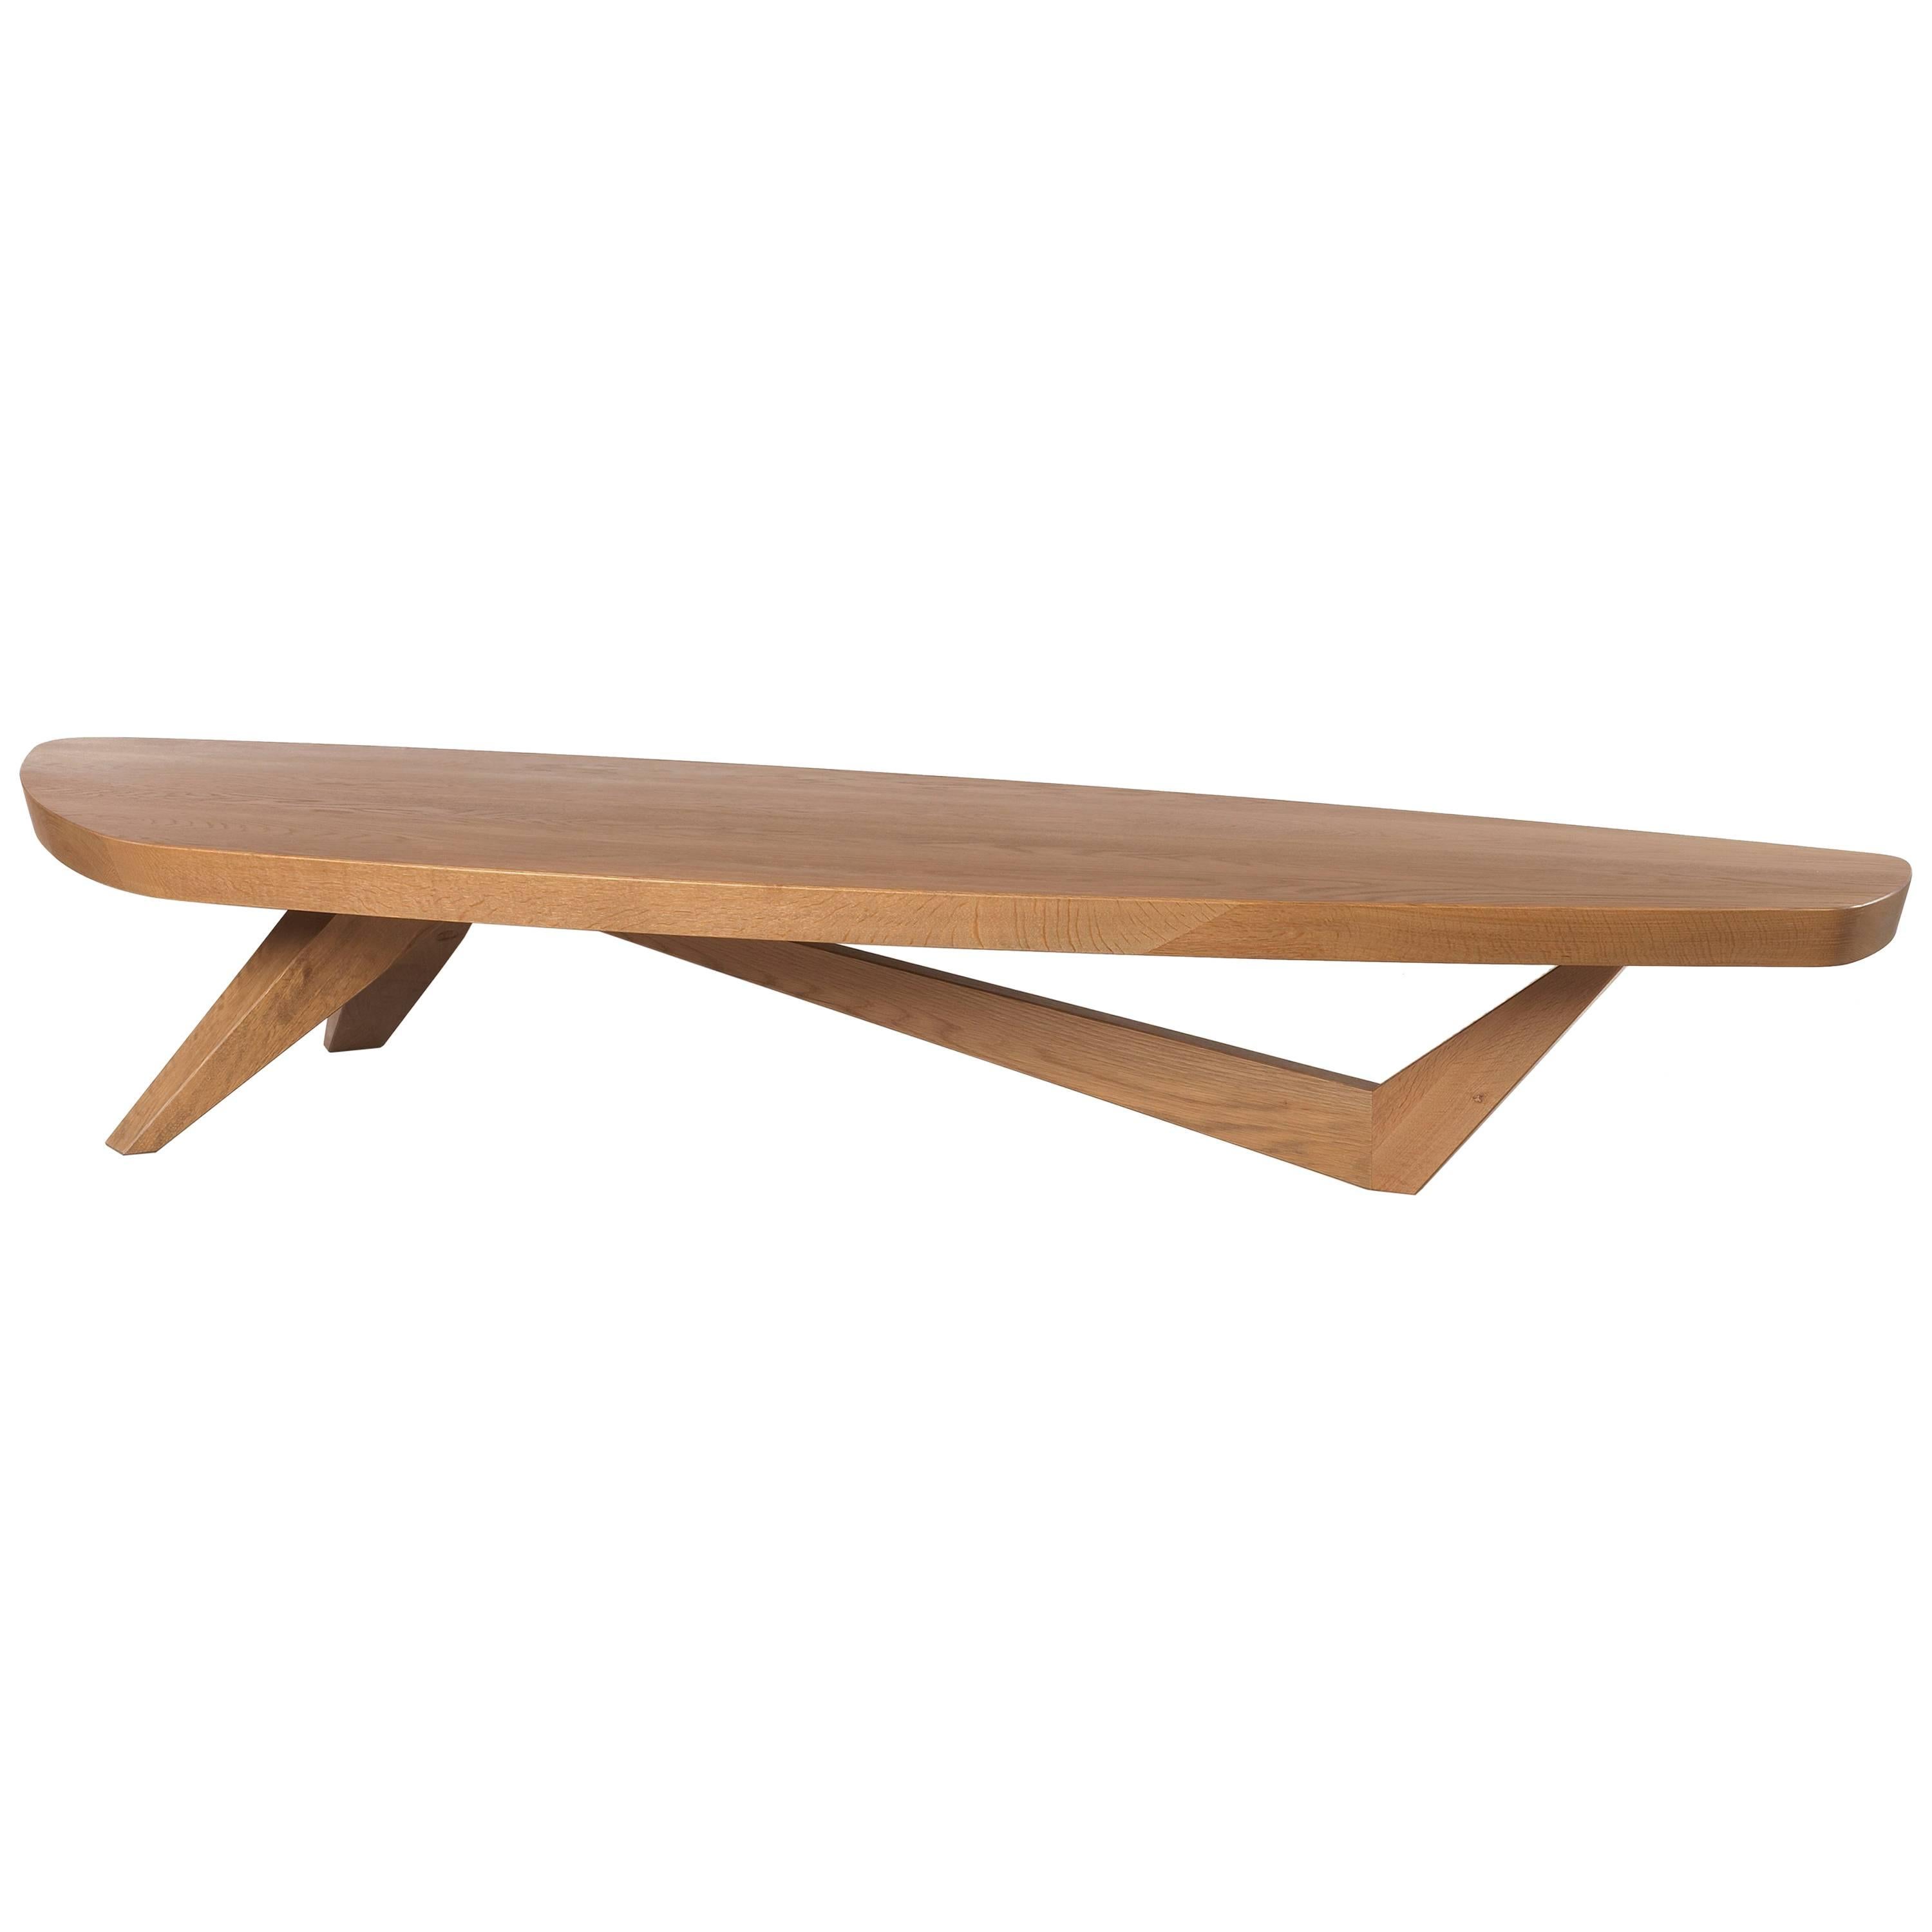 Coastal Moby Coffee Table, Long, Ash / Amber, Solid Wood, Handcrafted, Modern For Sale